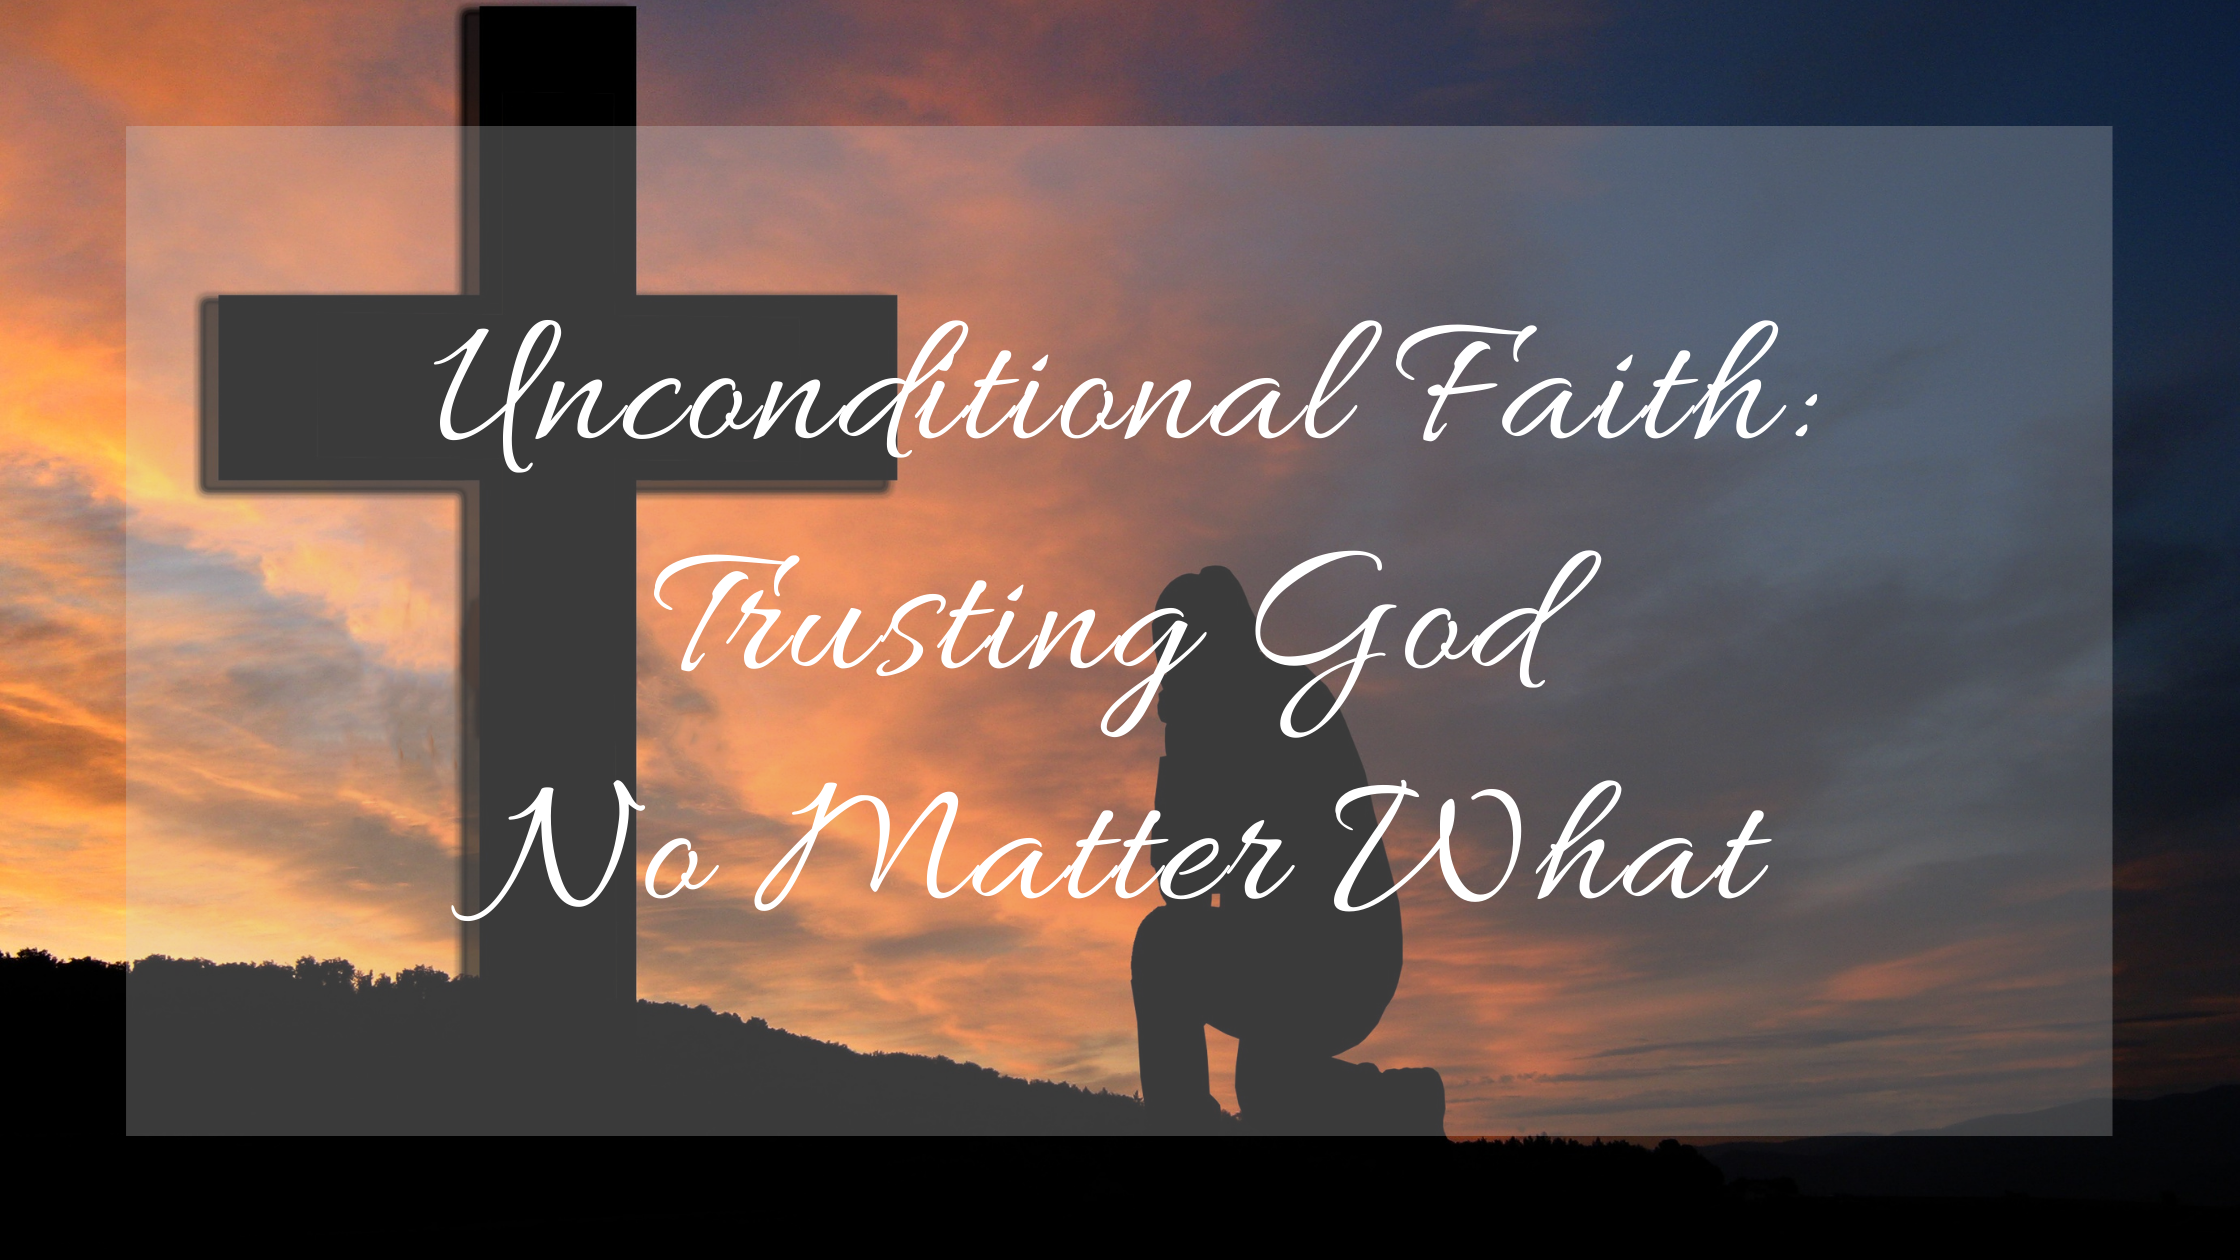 Unconditional Faith blog title with cross and kneeling person in background